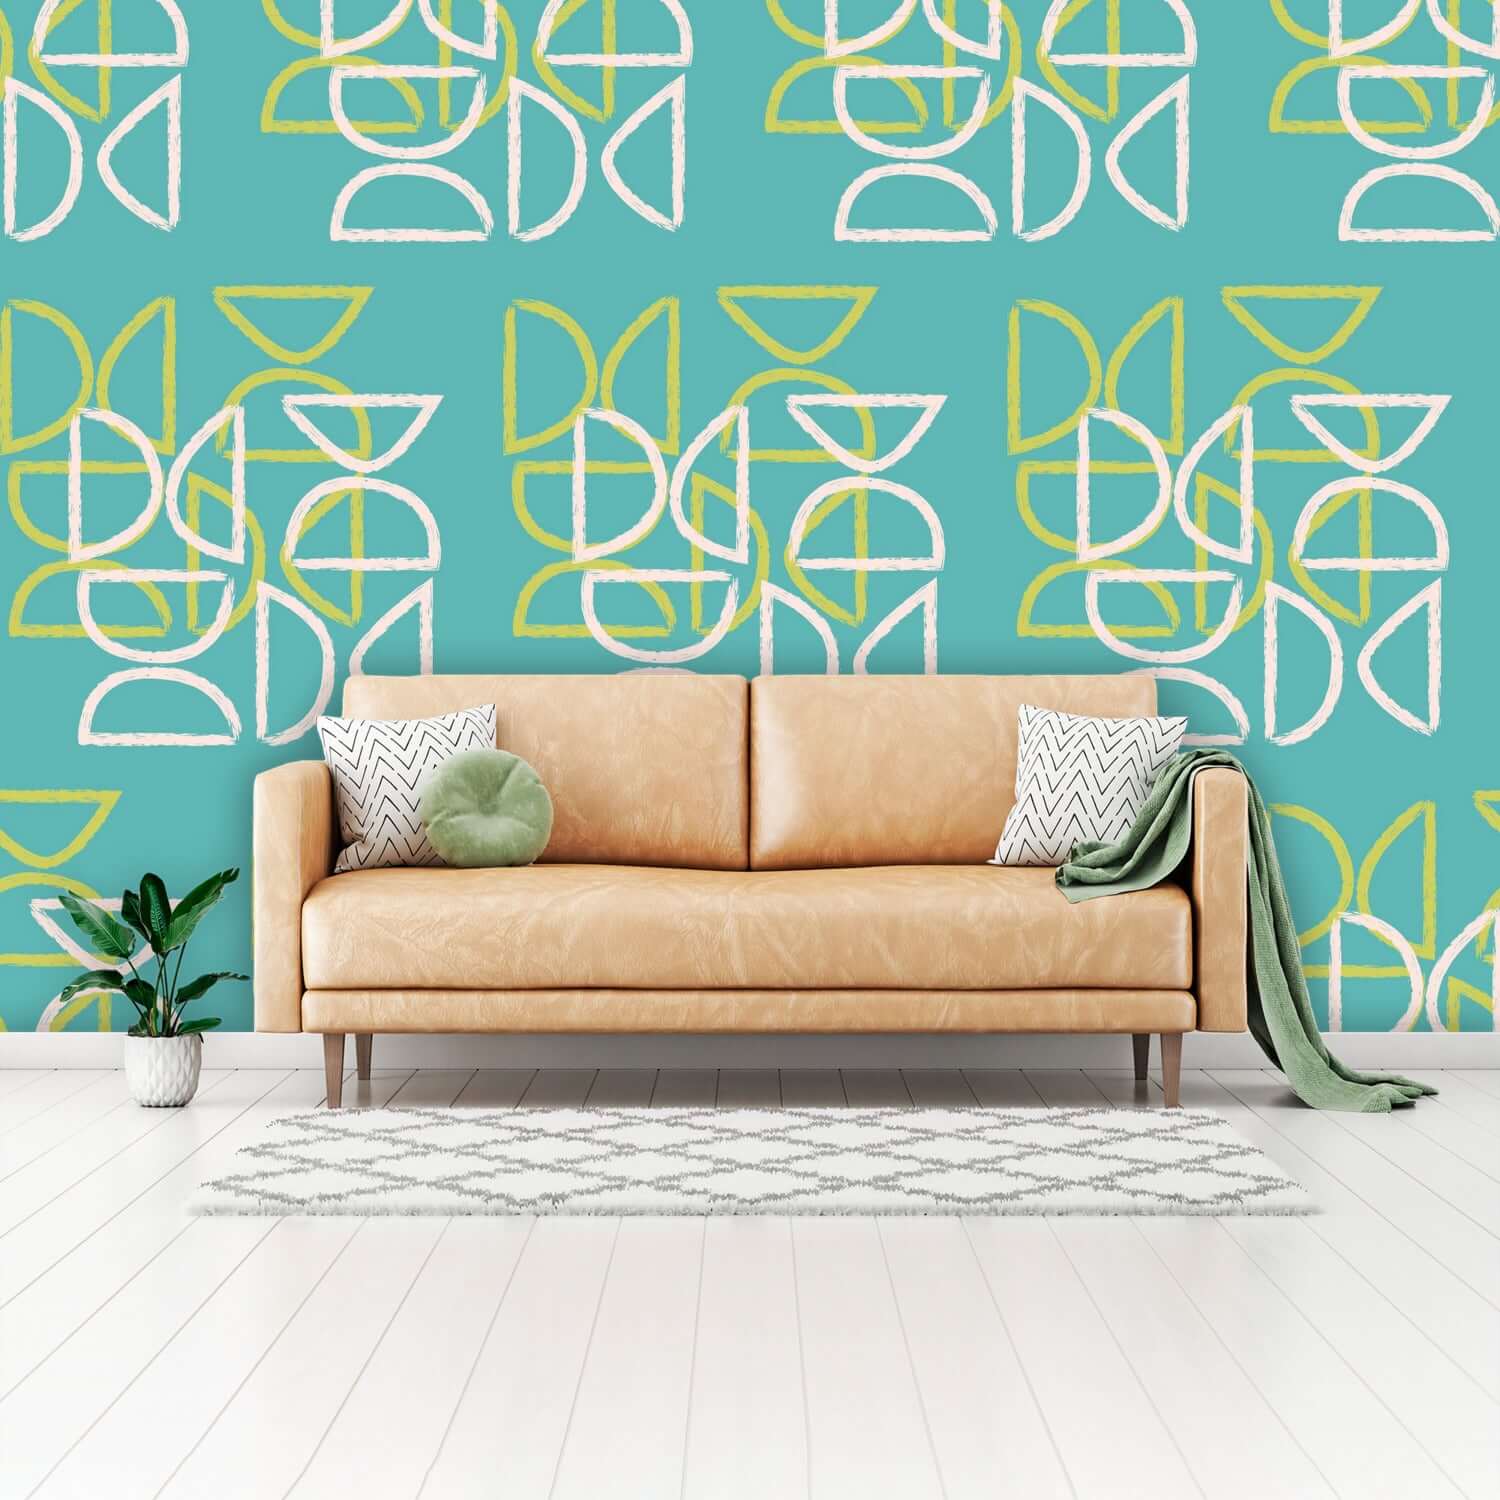 Tiki Wall Mural, Peel And Stick , Teal Blue,  Abstract, Mid Century Modern Wall Murals Wall Paper H110 x W160